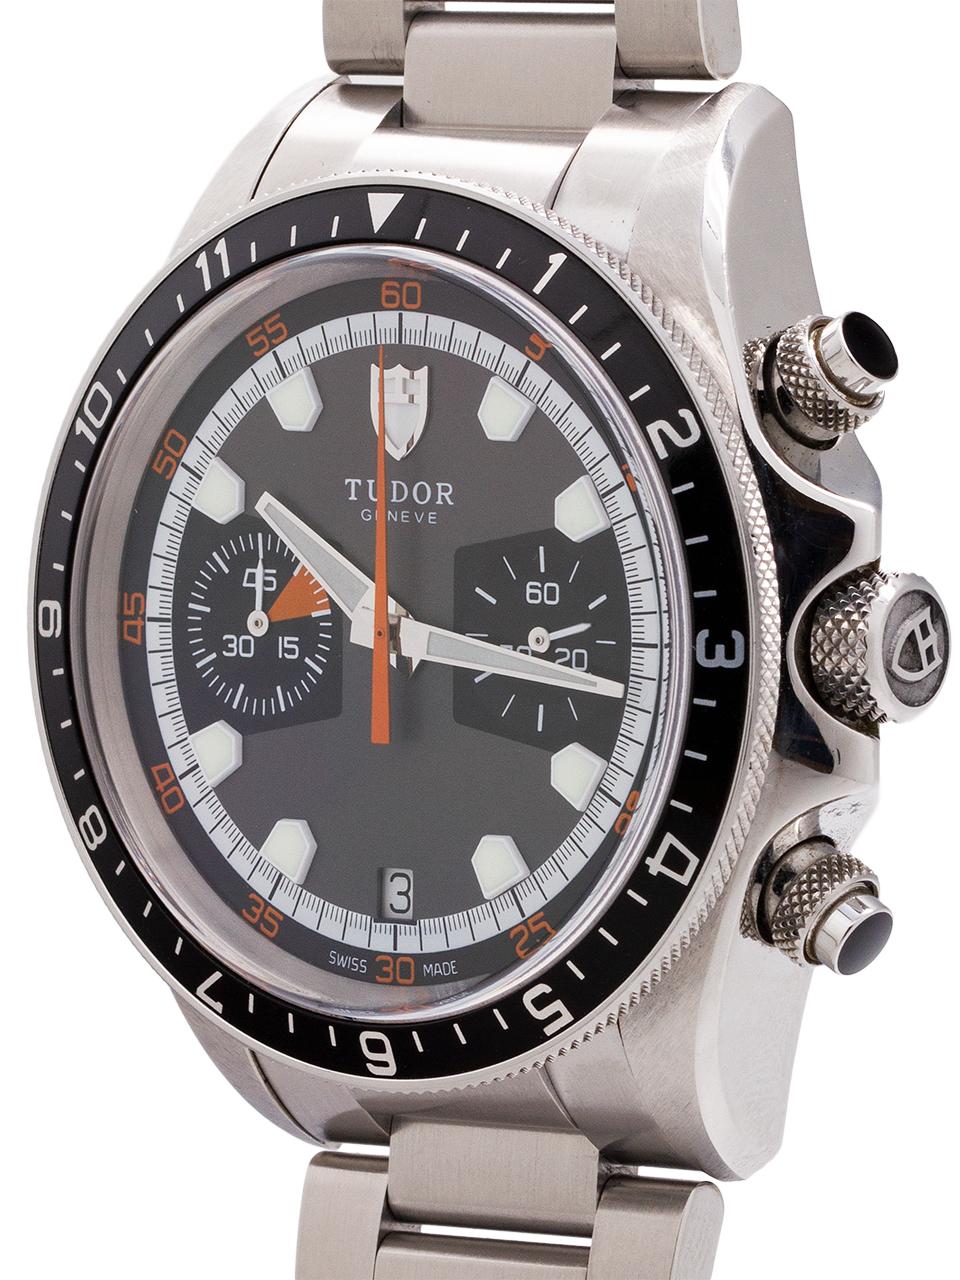 
Tudor Heritage Chrono, the modern reinterpretation of the famous 1972 Tudor Monte Carlo, complete with the beloved “home plate” markers. Like new condition with warranty card dated to May of 2012. Great looking gray dial with black registers and